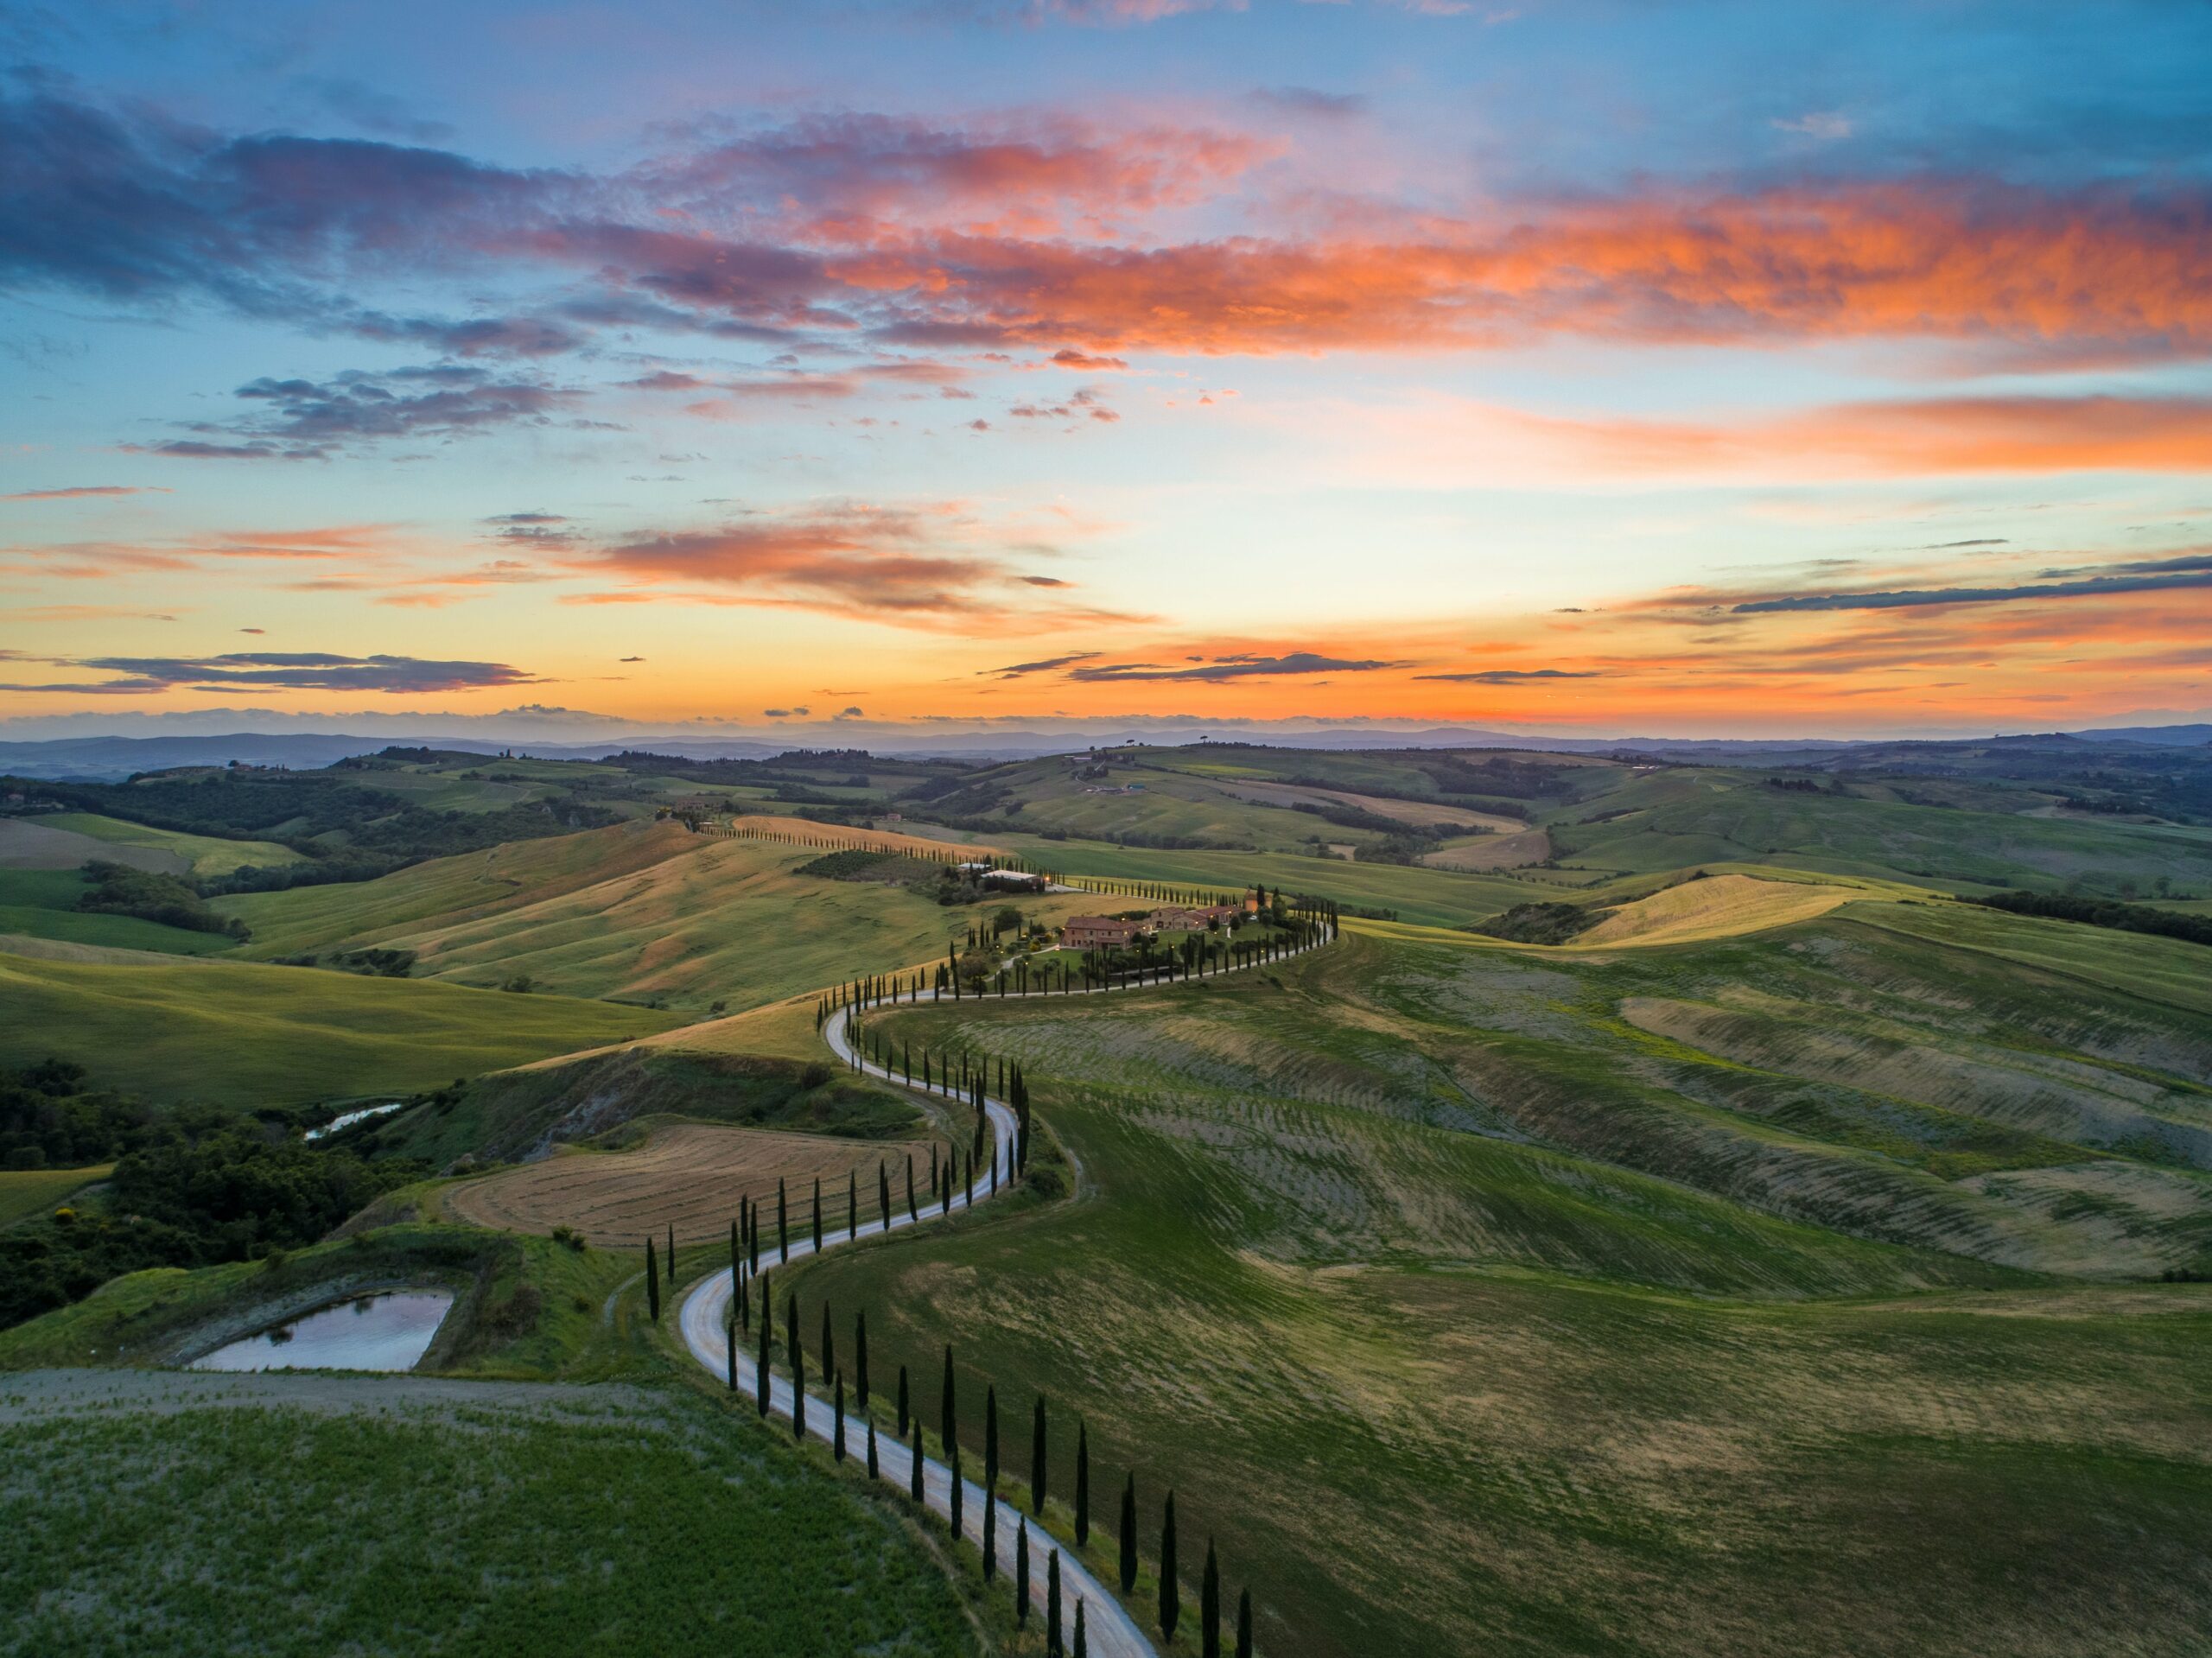 Tuscany is one of the most well known countryside regions of Italy. Check out what the area has to offer travelers. 
pictured: A stunning amber sunset over a winding road and bountiful hills in Tuscany, Italy